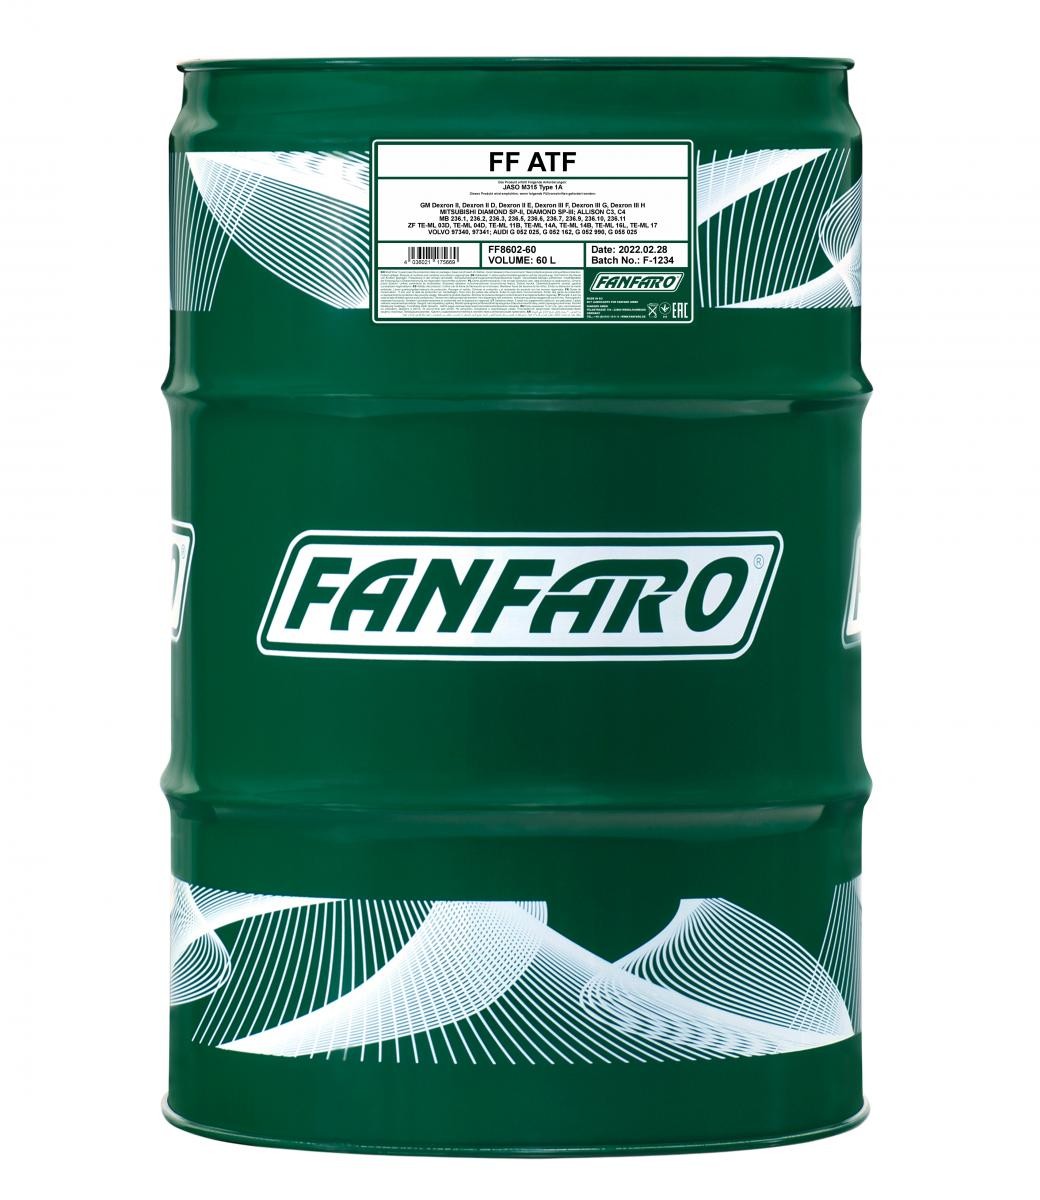 Great value for money - FANFARO Automatic transmission fluid FF8602-60